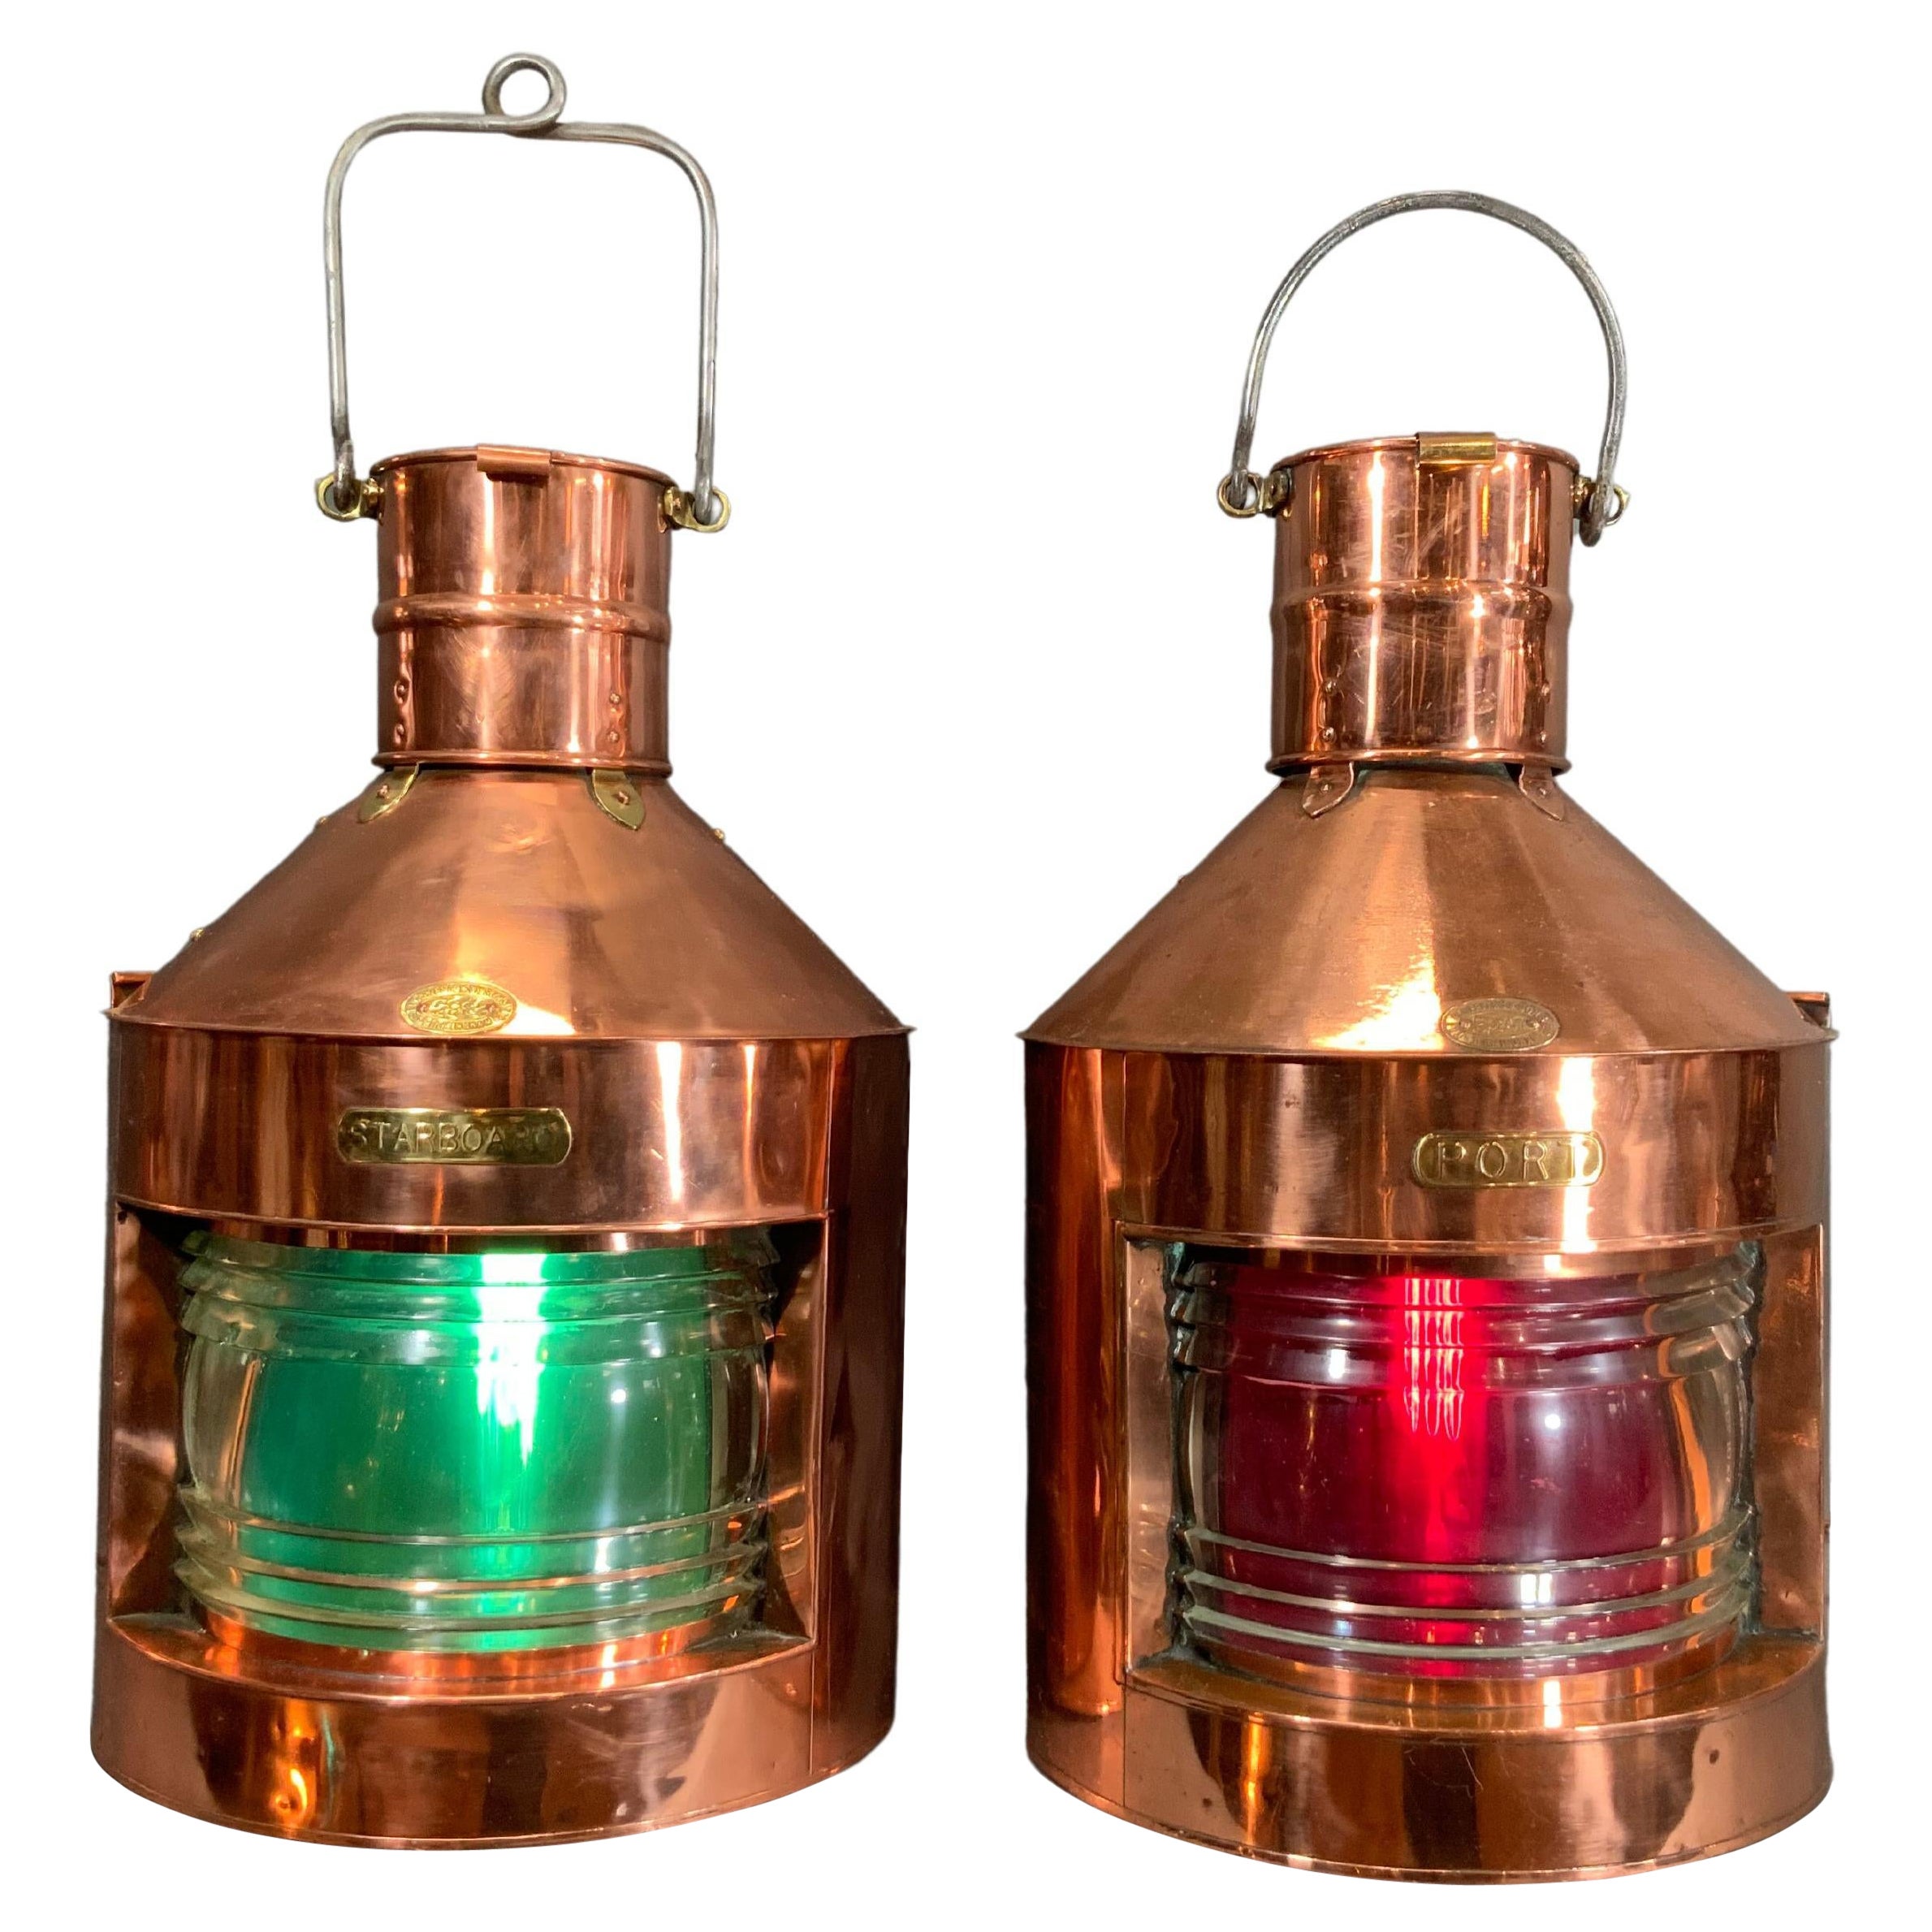 Pair of Solid Copper Port and Starboard Lights by "Griffiths & Sons"